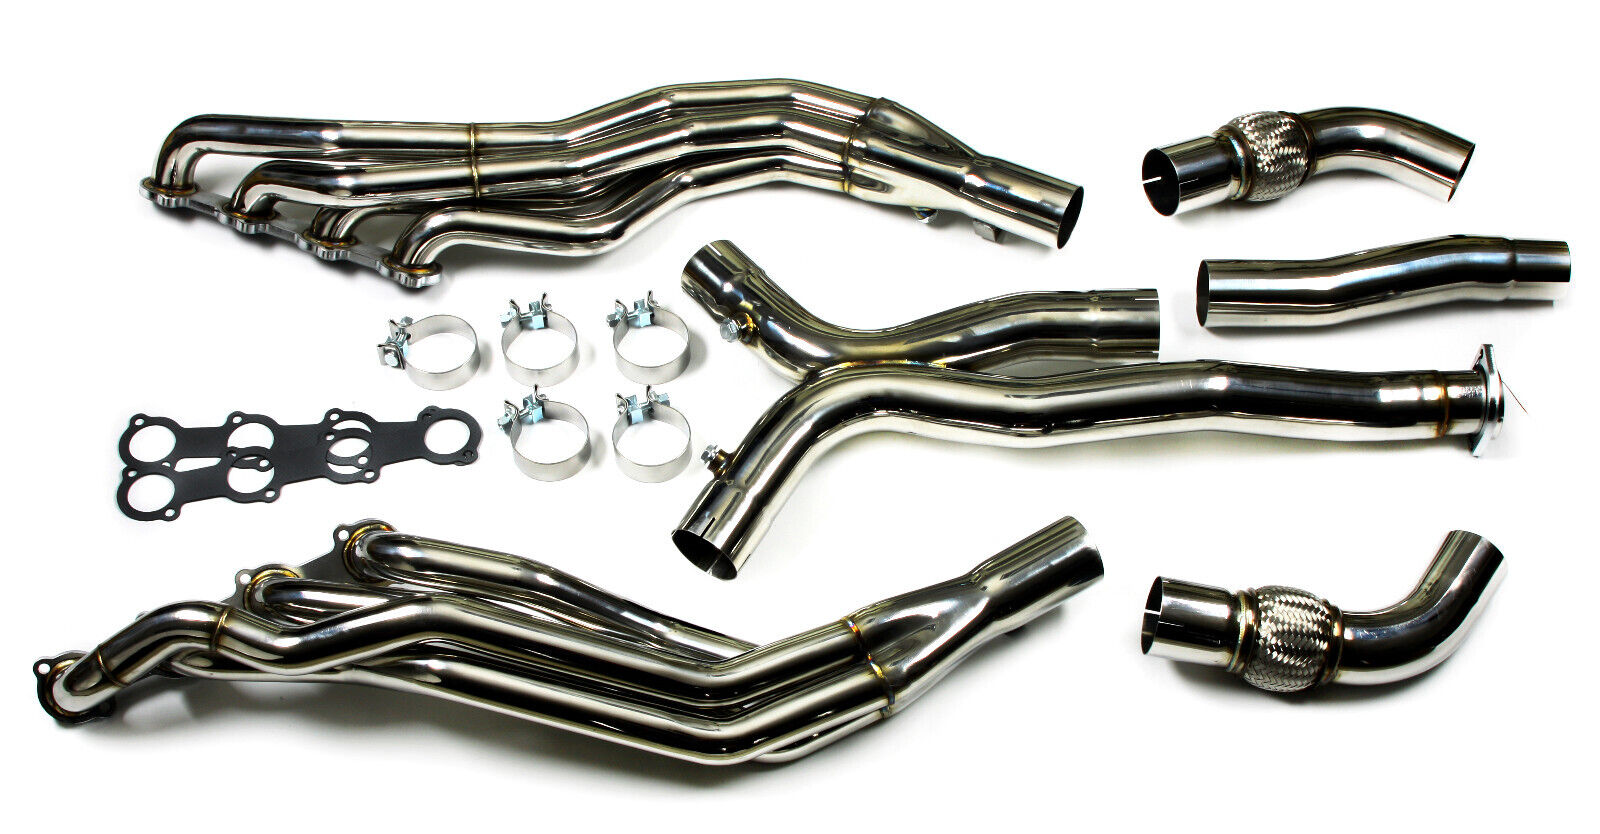 Header  Long Replacement For Mercedes Benz Amg Cls55 Cls500 E55 E500 M113k Long